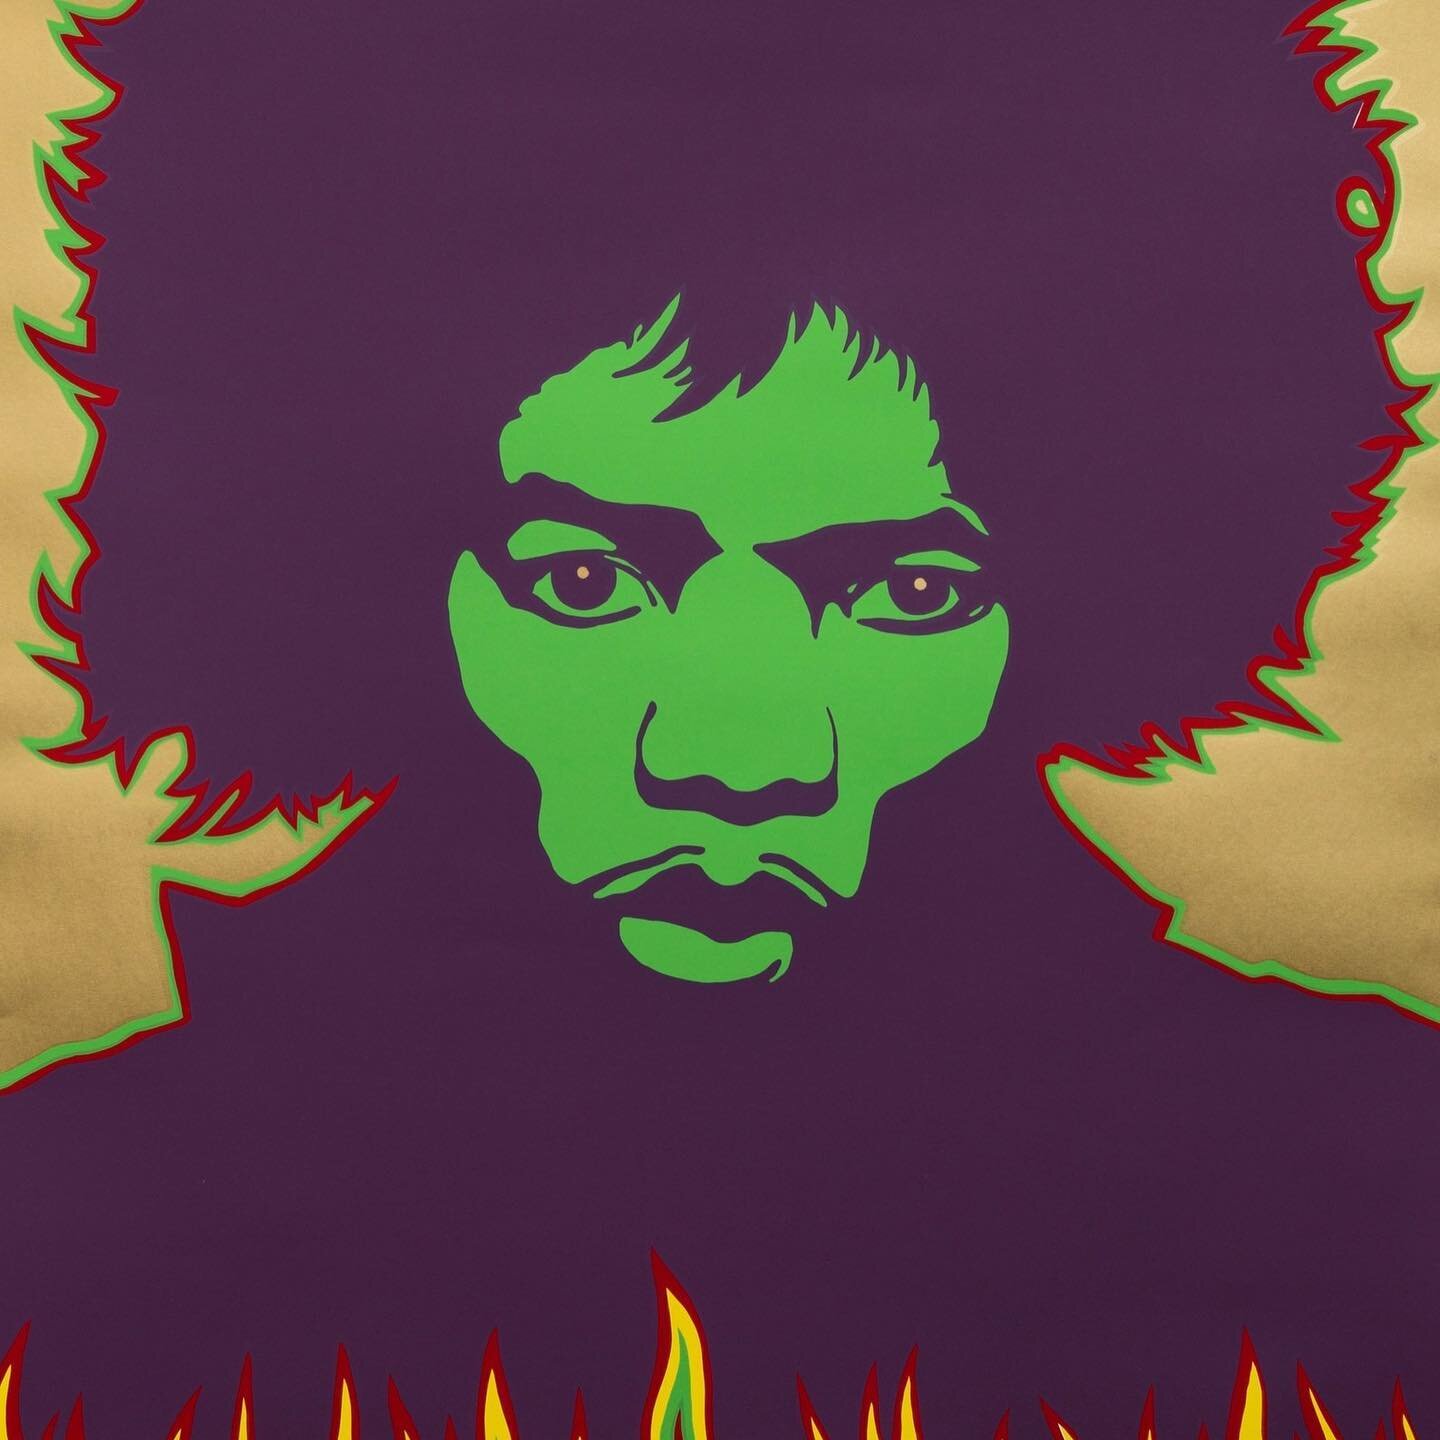 Swipe to see Jimi Hendrix, Bob Dylan and John Lennon portraits by Larry Smart. Perfect Pop Art Christmas gifts. Pop to our website (link in bio) for delivery by Christmas. &pound;50 gorgeous quality silk screen prints.
*
*
*
#christmassale #giveartfo